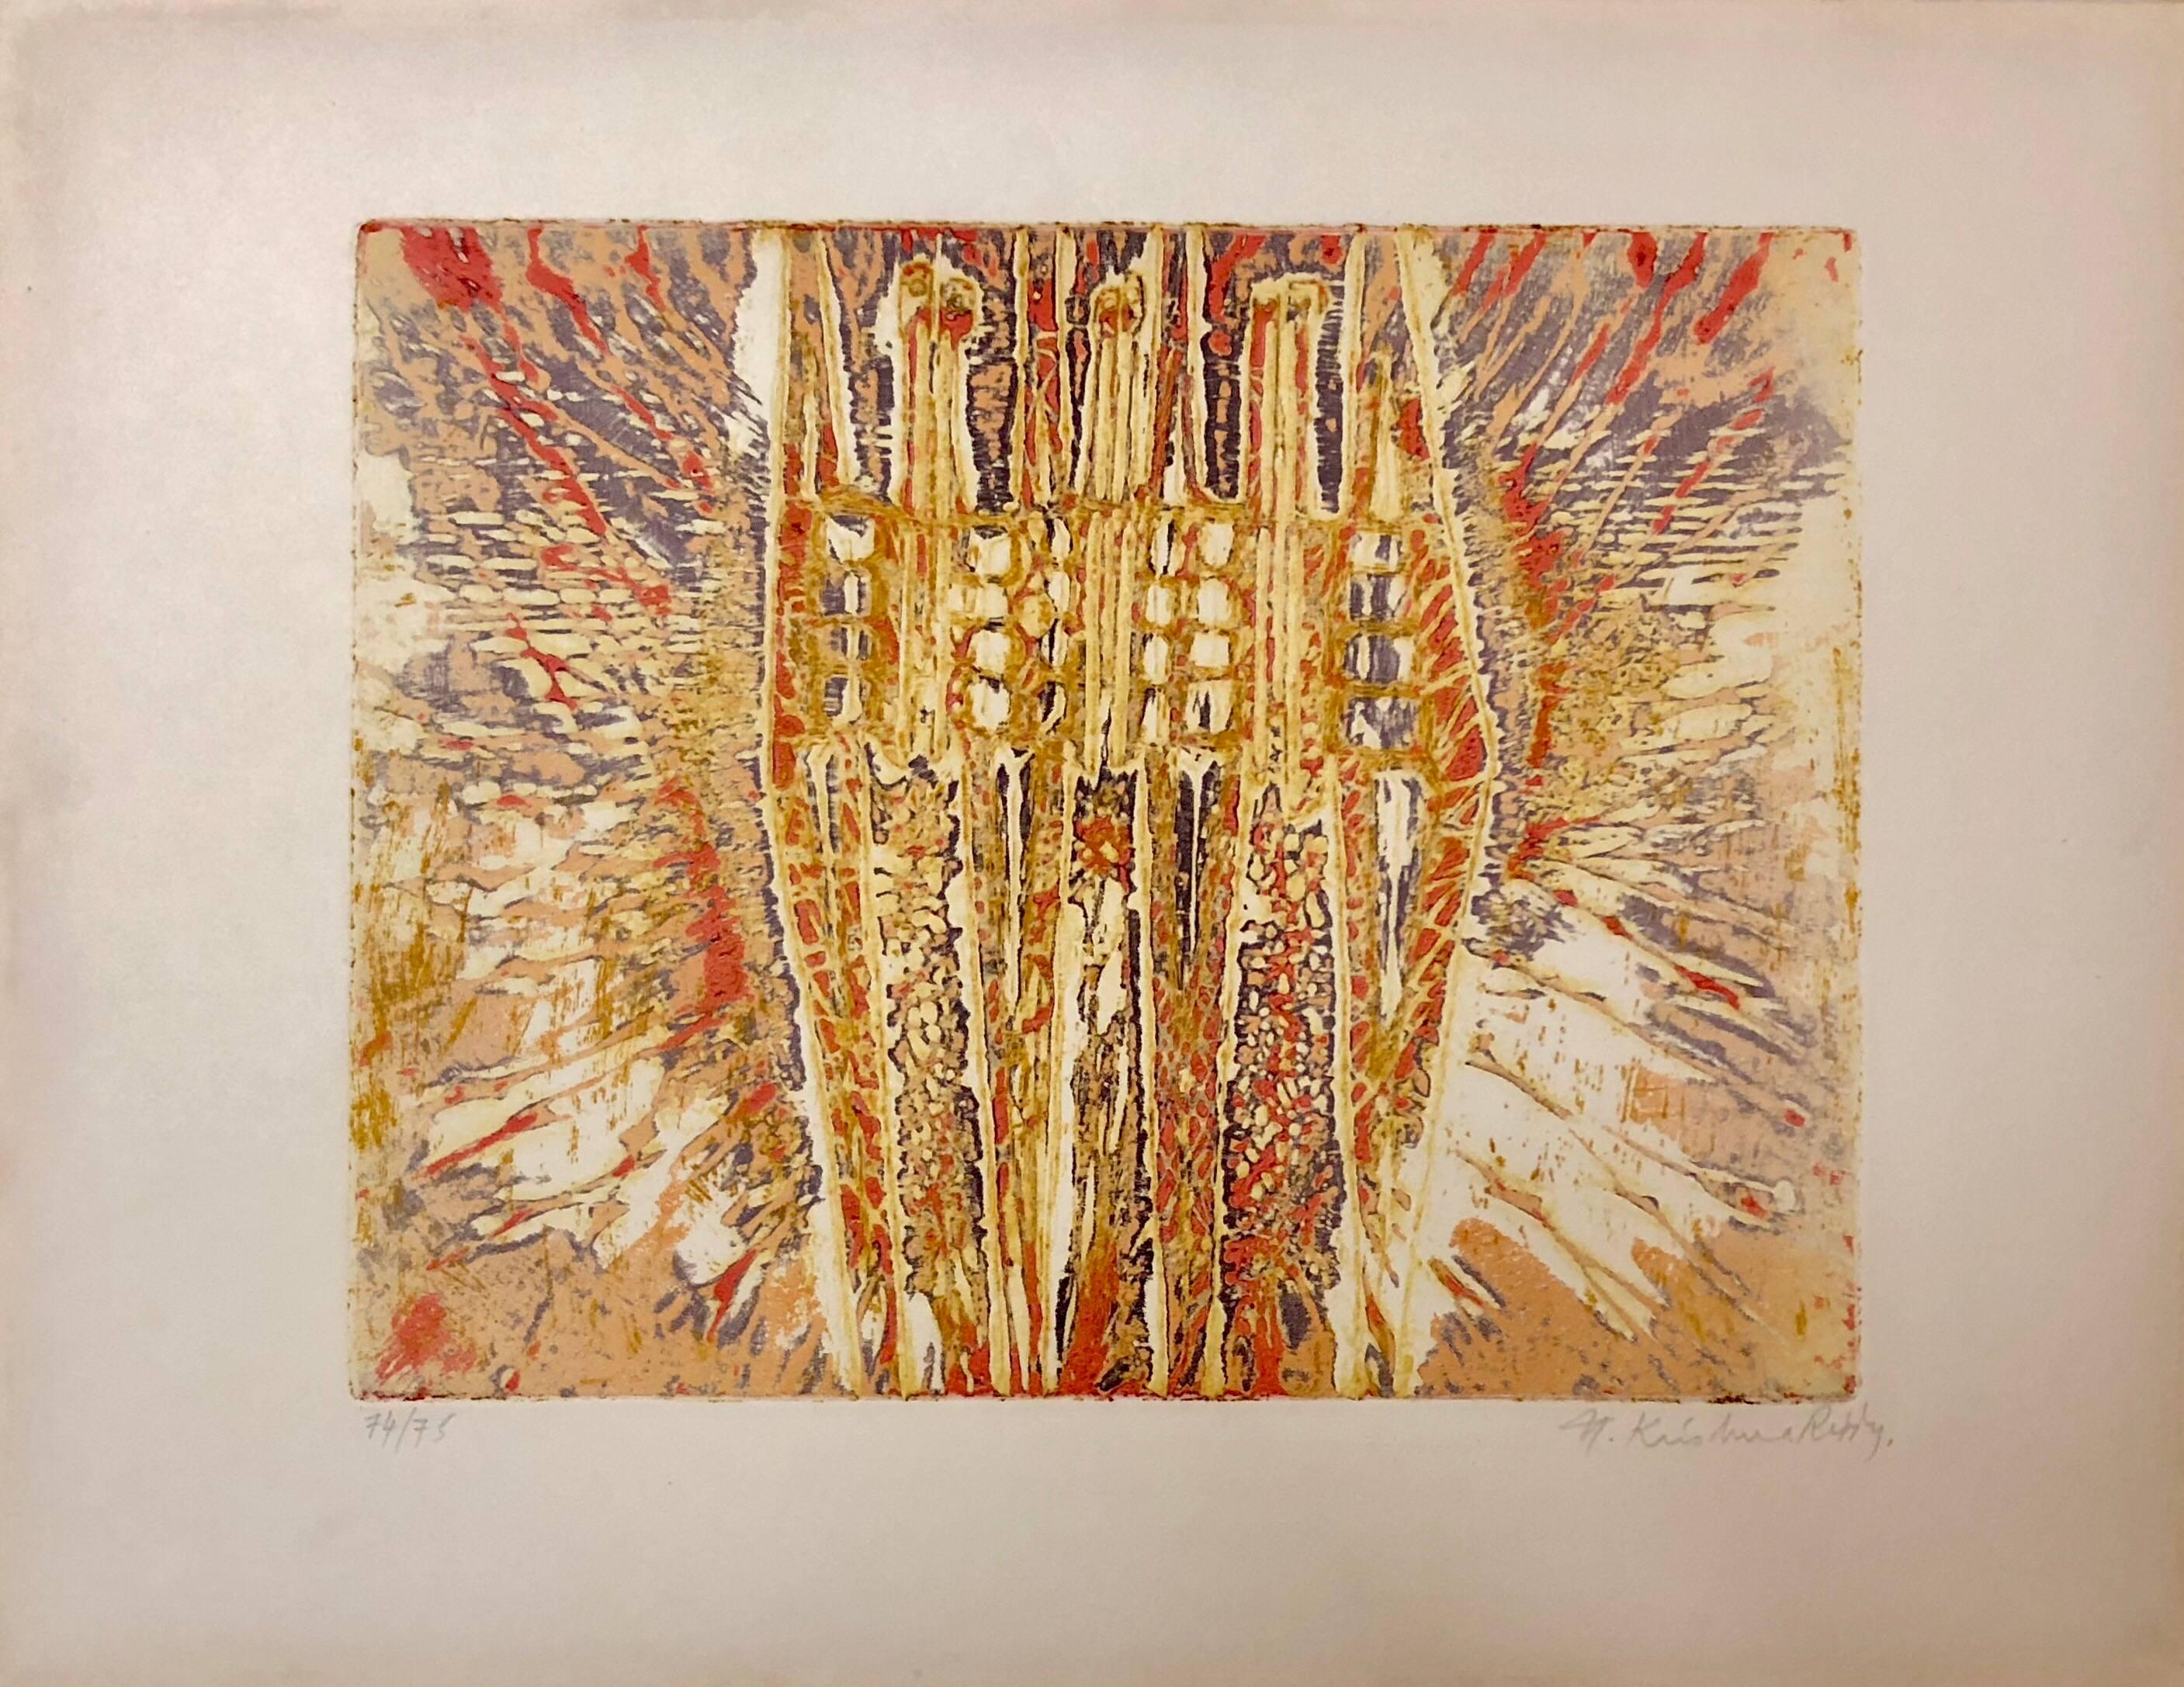 A limited edition, hand signed in pencil intaglio etching on French Arches deckle edged art paper. 

Krishna Reddy (1925 – 2018) was an Indian master intaglio printmaker, sculptor, and teacher. He was considered a master intaglio printer and known